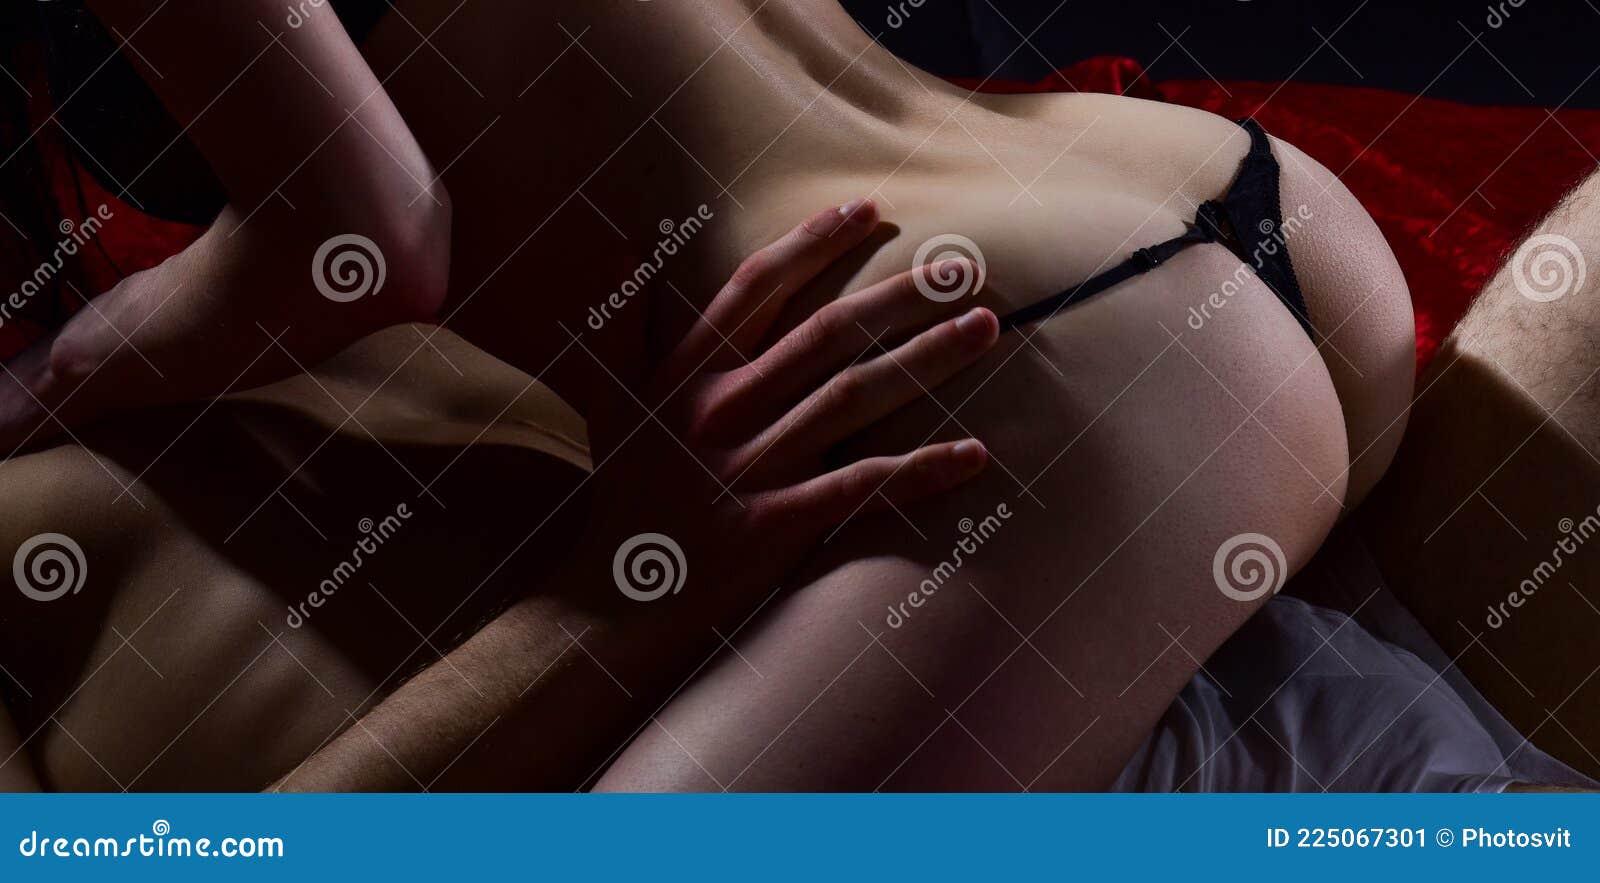 Sensual Couple in Love of Girlfriend and Boyfriend Lovers Having Sex Foreplay with Undressed Body, Enticement Stock Image photo picture